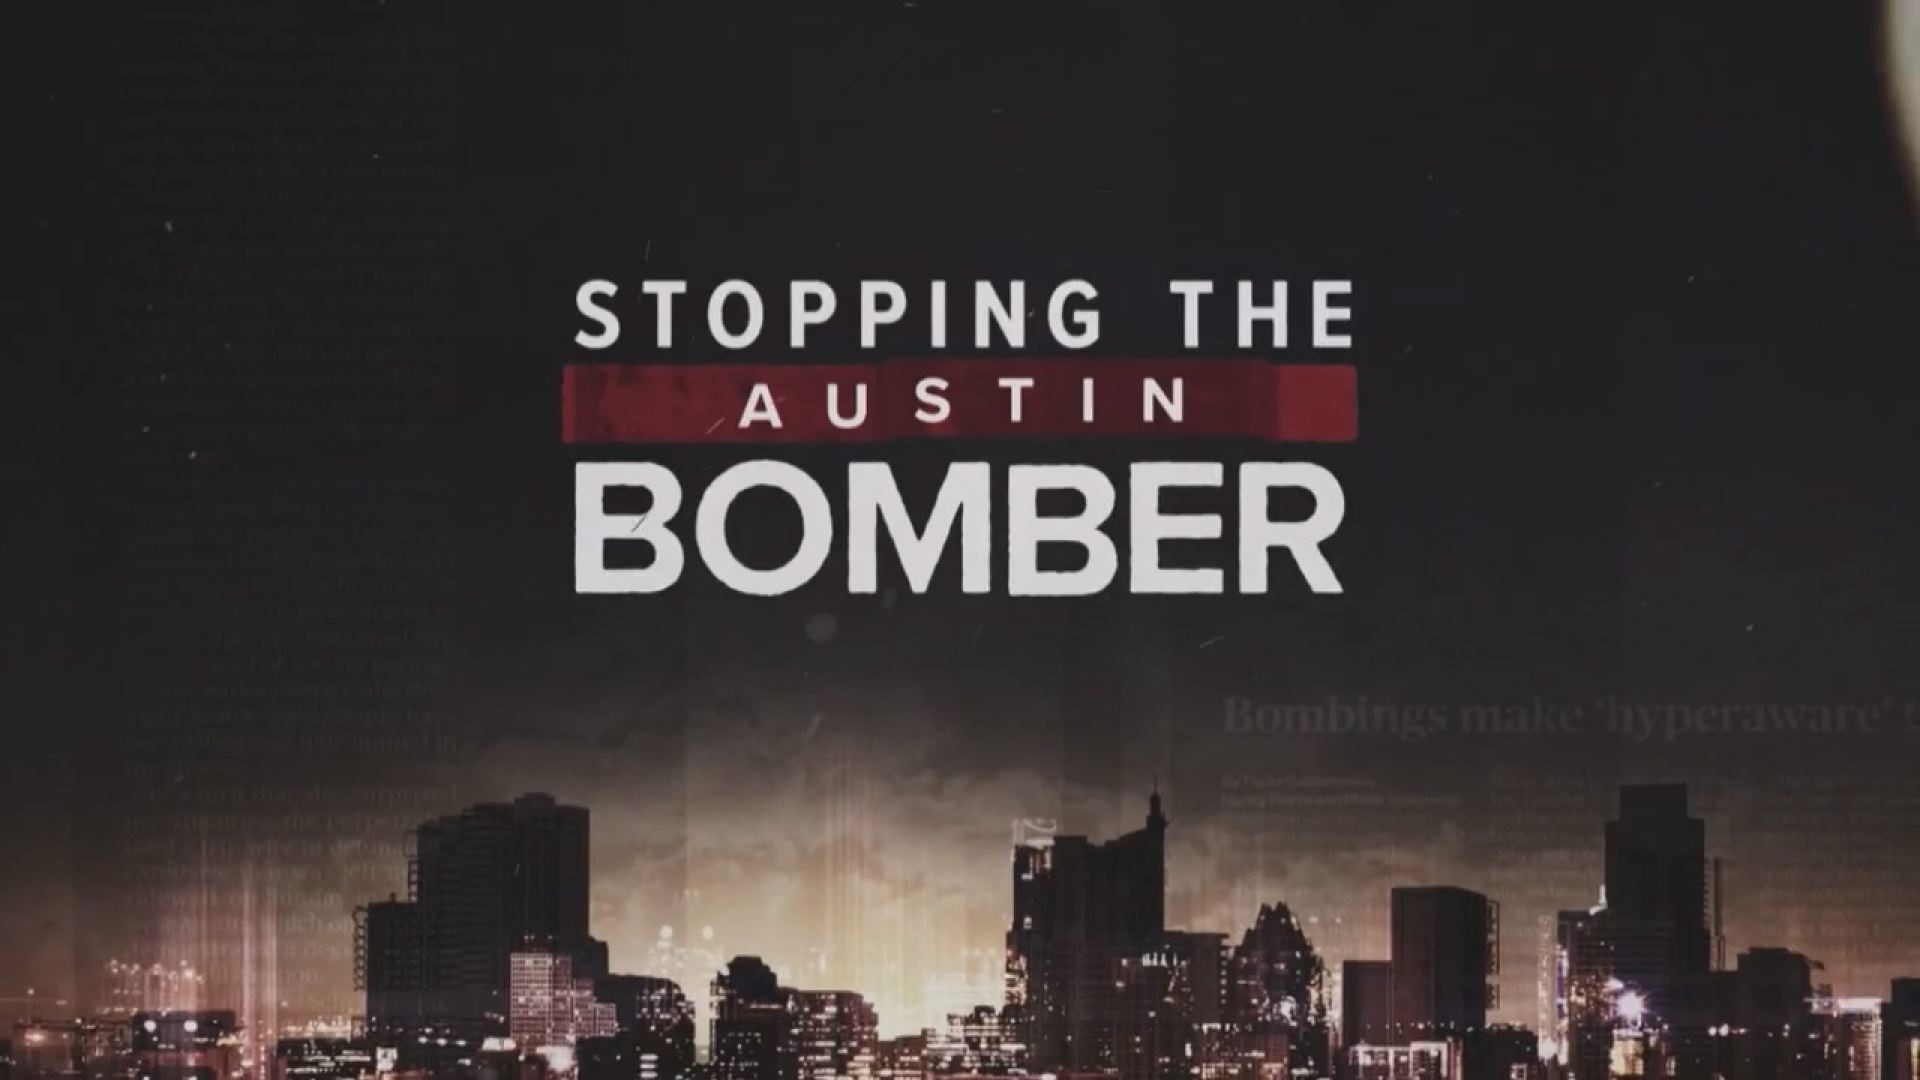 A year after the Austin bombings, investigators open up about how they retraced the bomber's steps to find him.